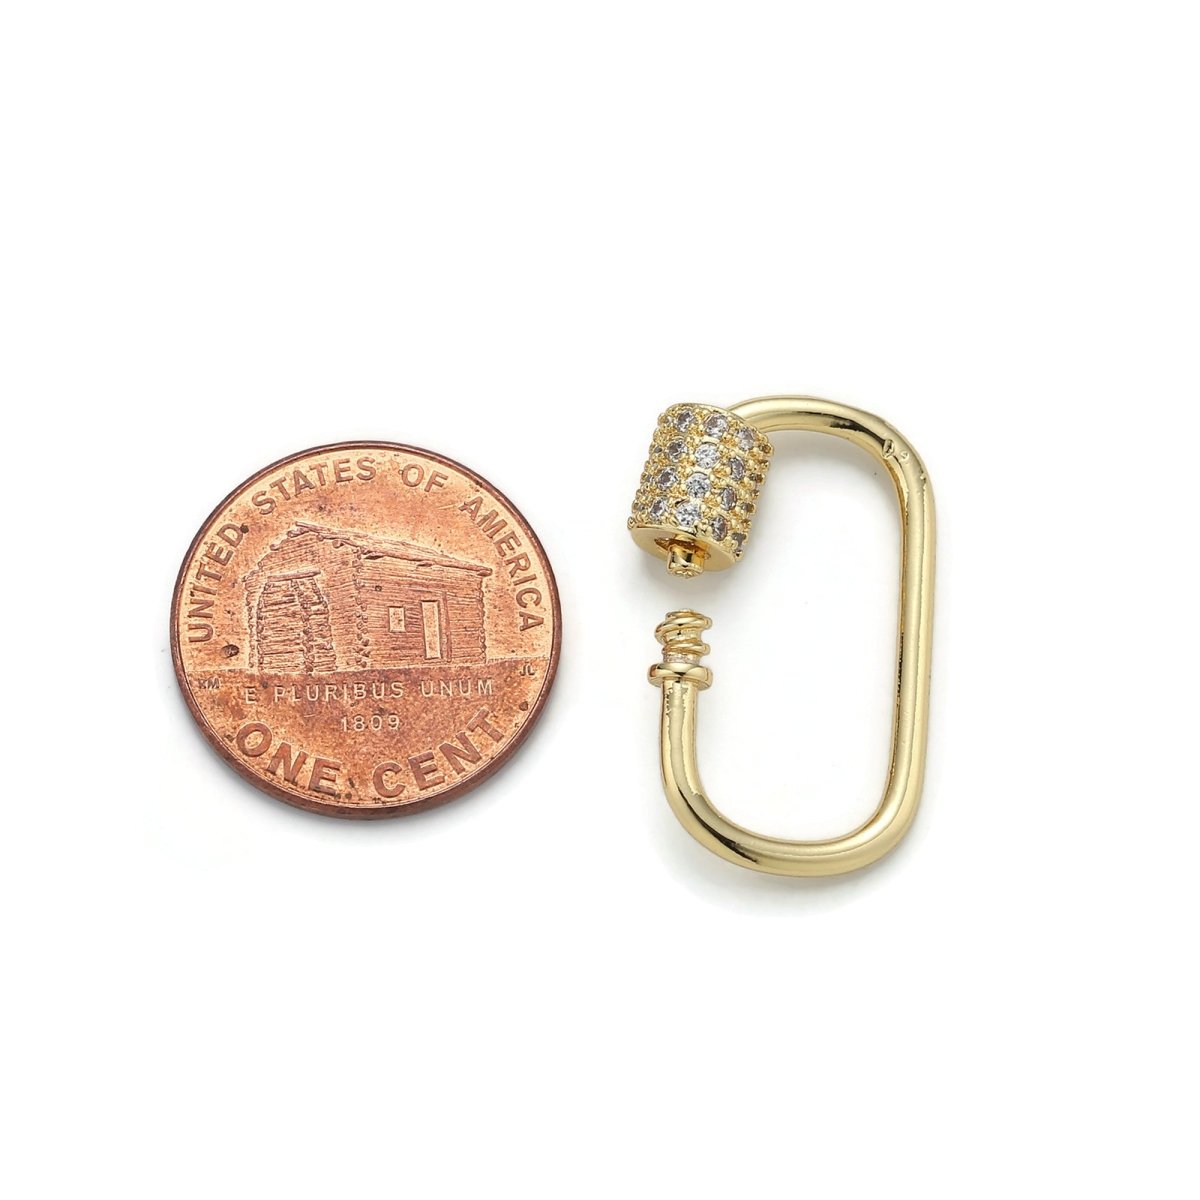 24K Gold-Plated Paperclip Oval Carabiner, Circle Screw Clasp with Zirconia Rhinestones, Silver, Gold, or Black Option - DLUXCA